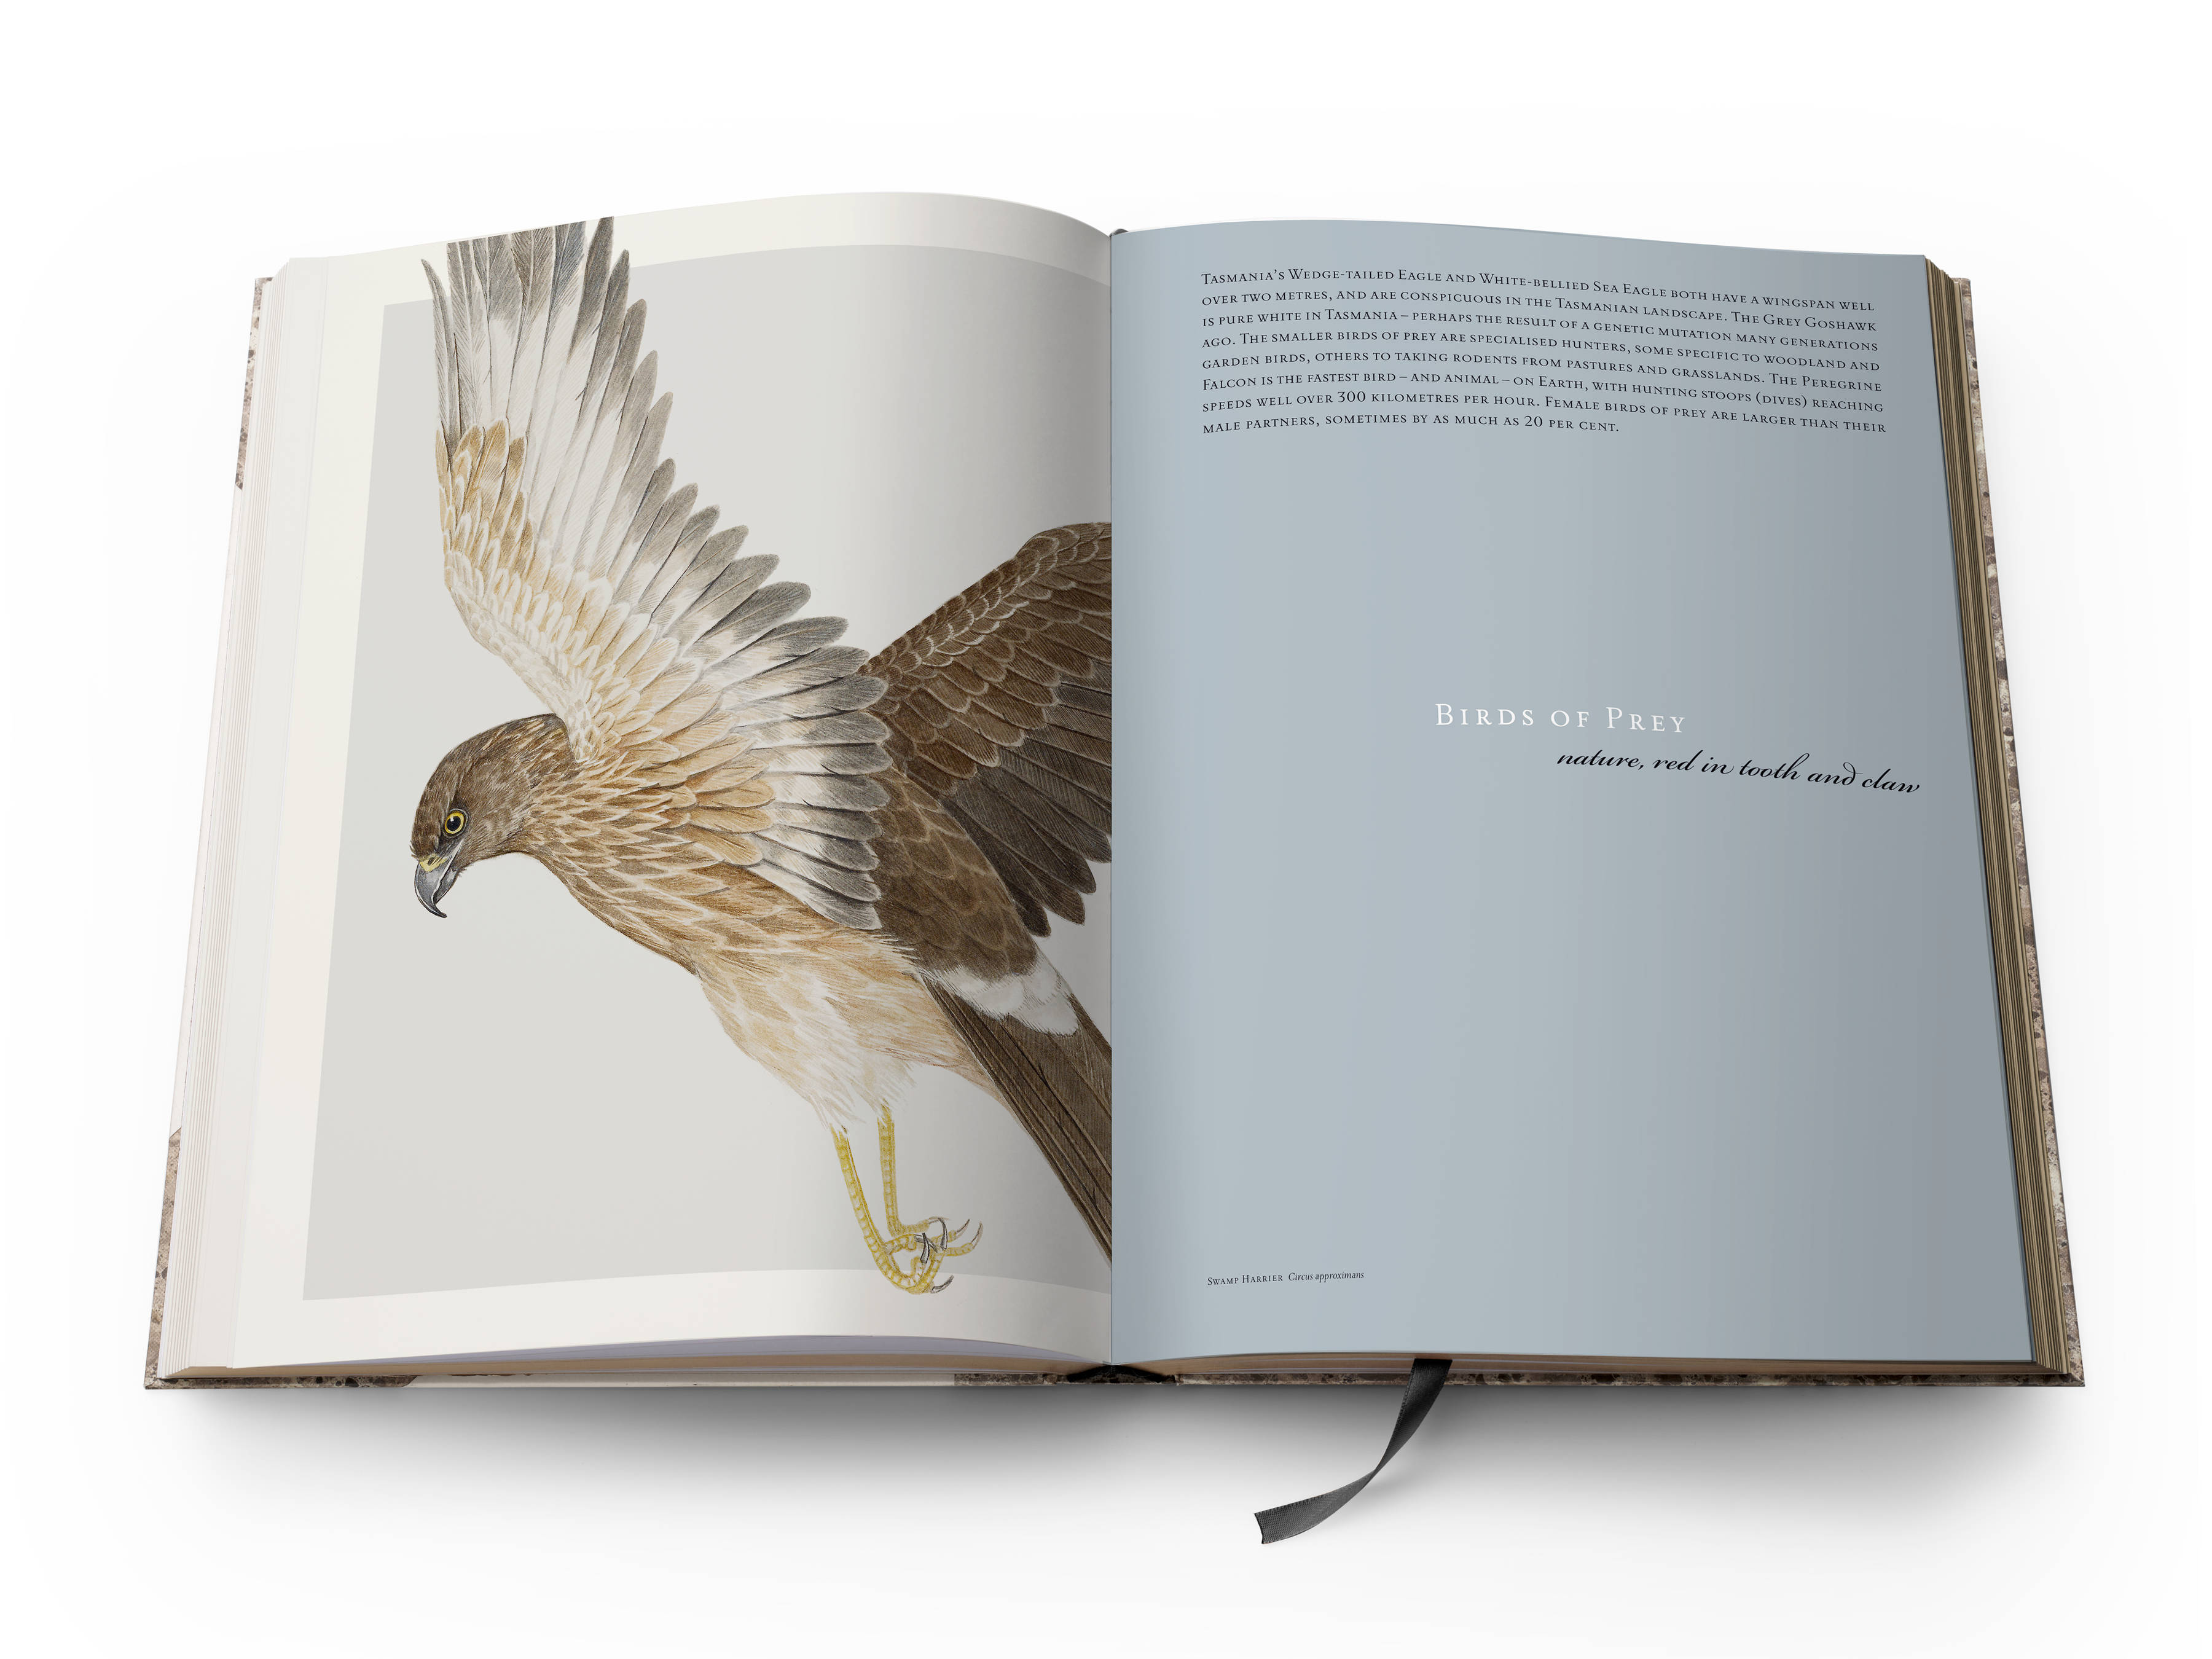 A double page spread from the book with a full-page colour plate of a Swamp Harrier ‘Circus approximans’ on the left and the title of the section Birds of Prey, ‘Nature red in tooth and claw’ on the right.